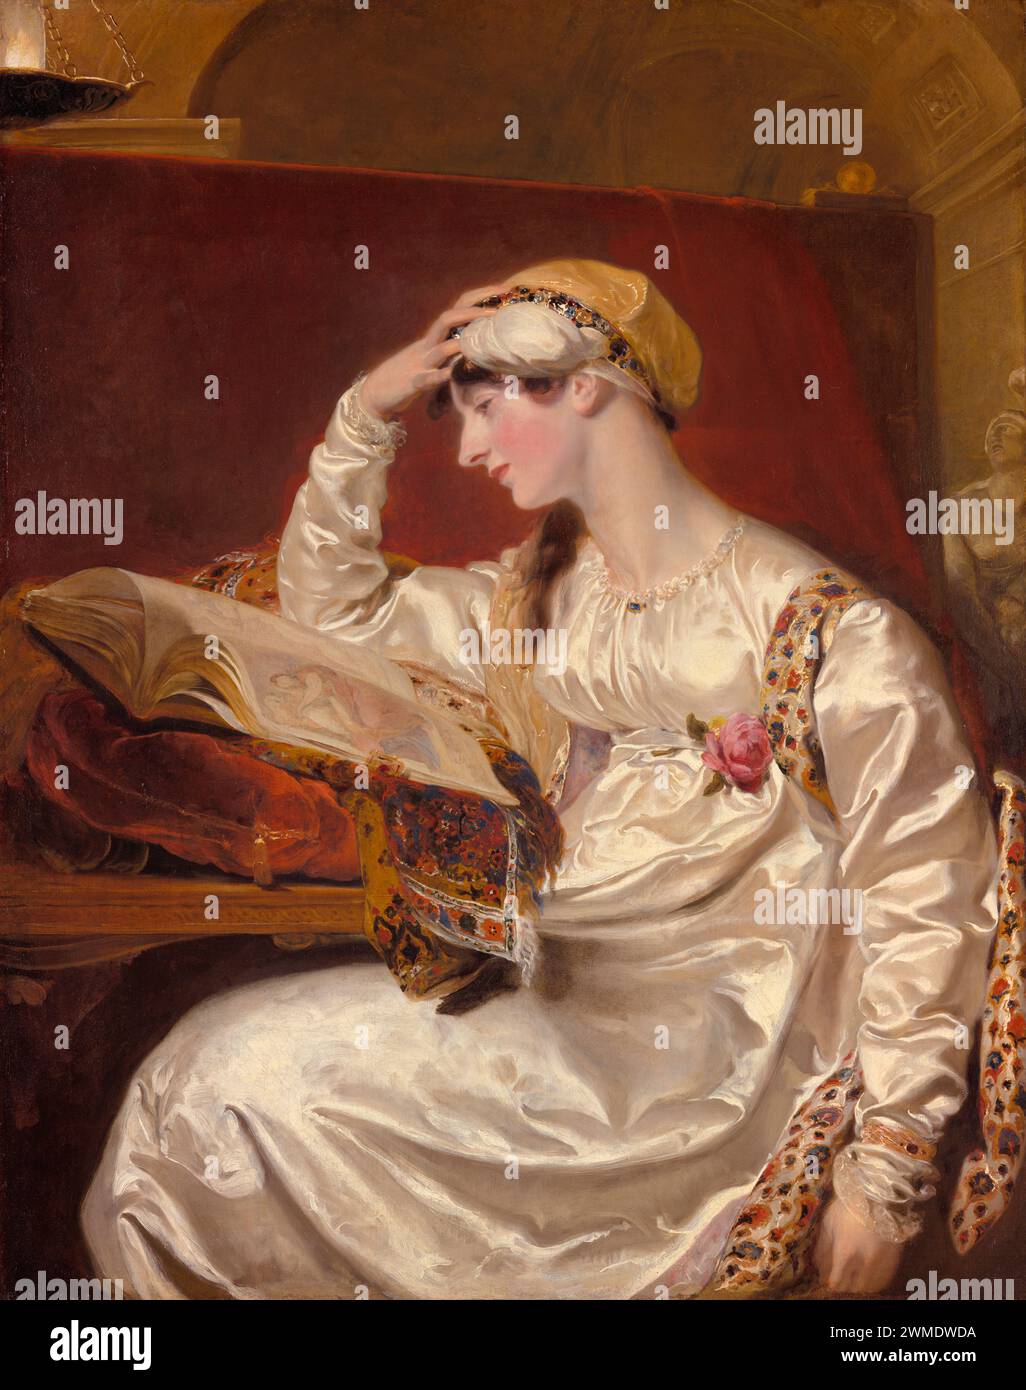 Sir Thomas Lawrence, Isabella Wolff, 1803/15 - A pensive lady adorned in a luxurious gown and turban contemplates an image, evoking classical wisdom and serene introspection Stock Photo